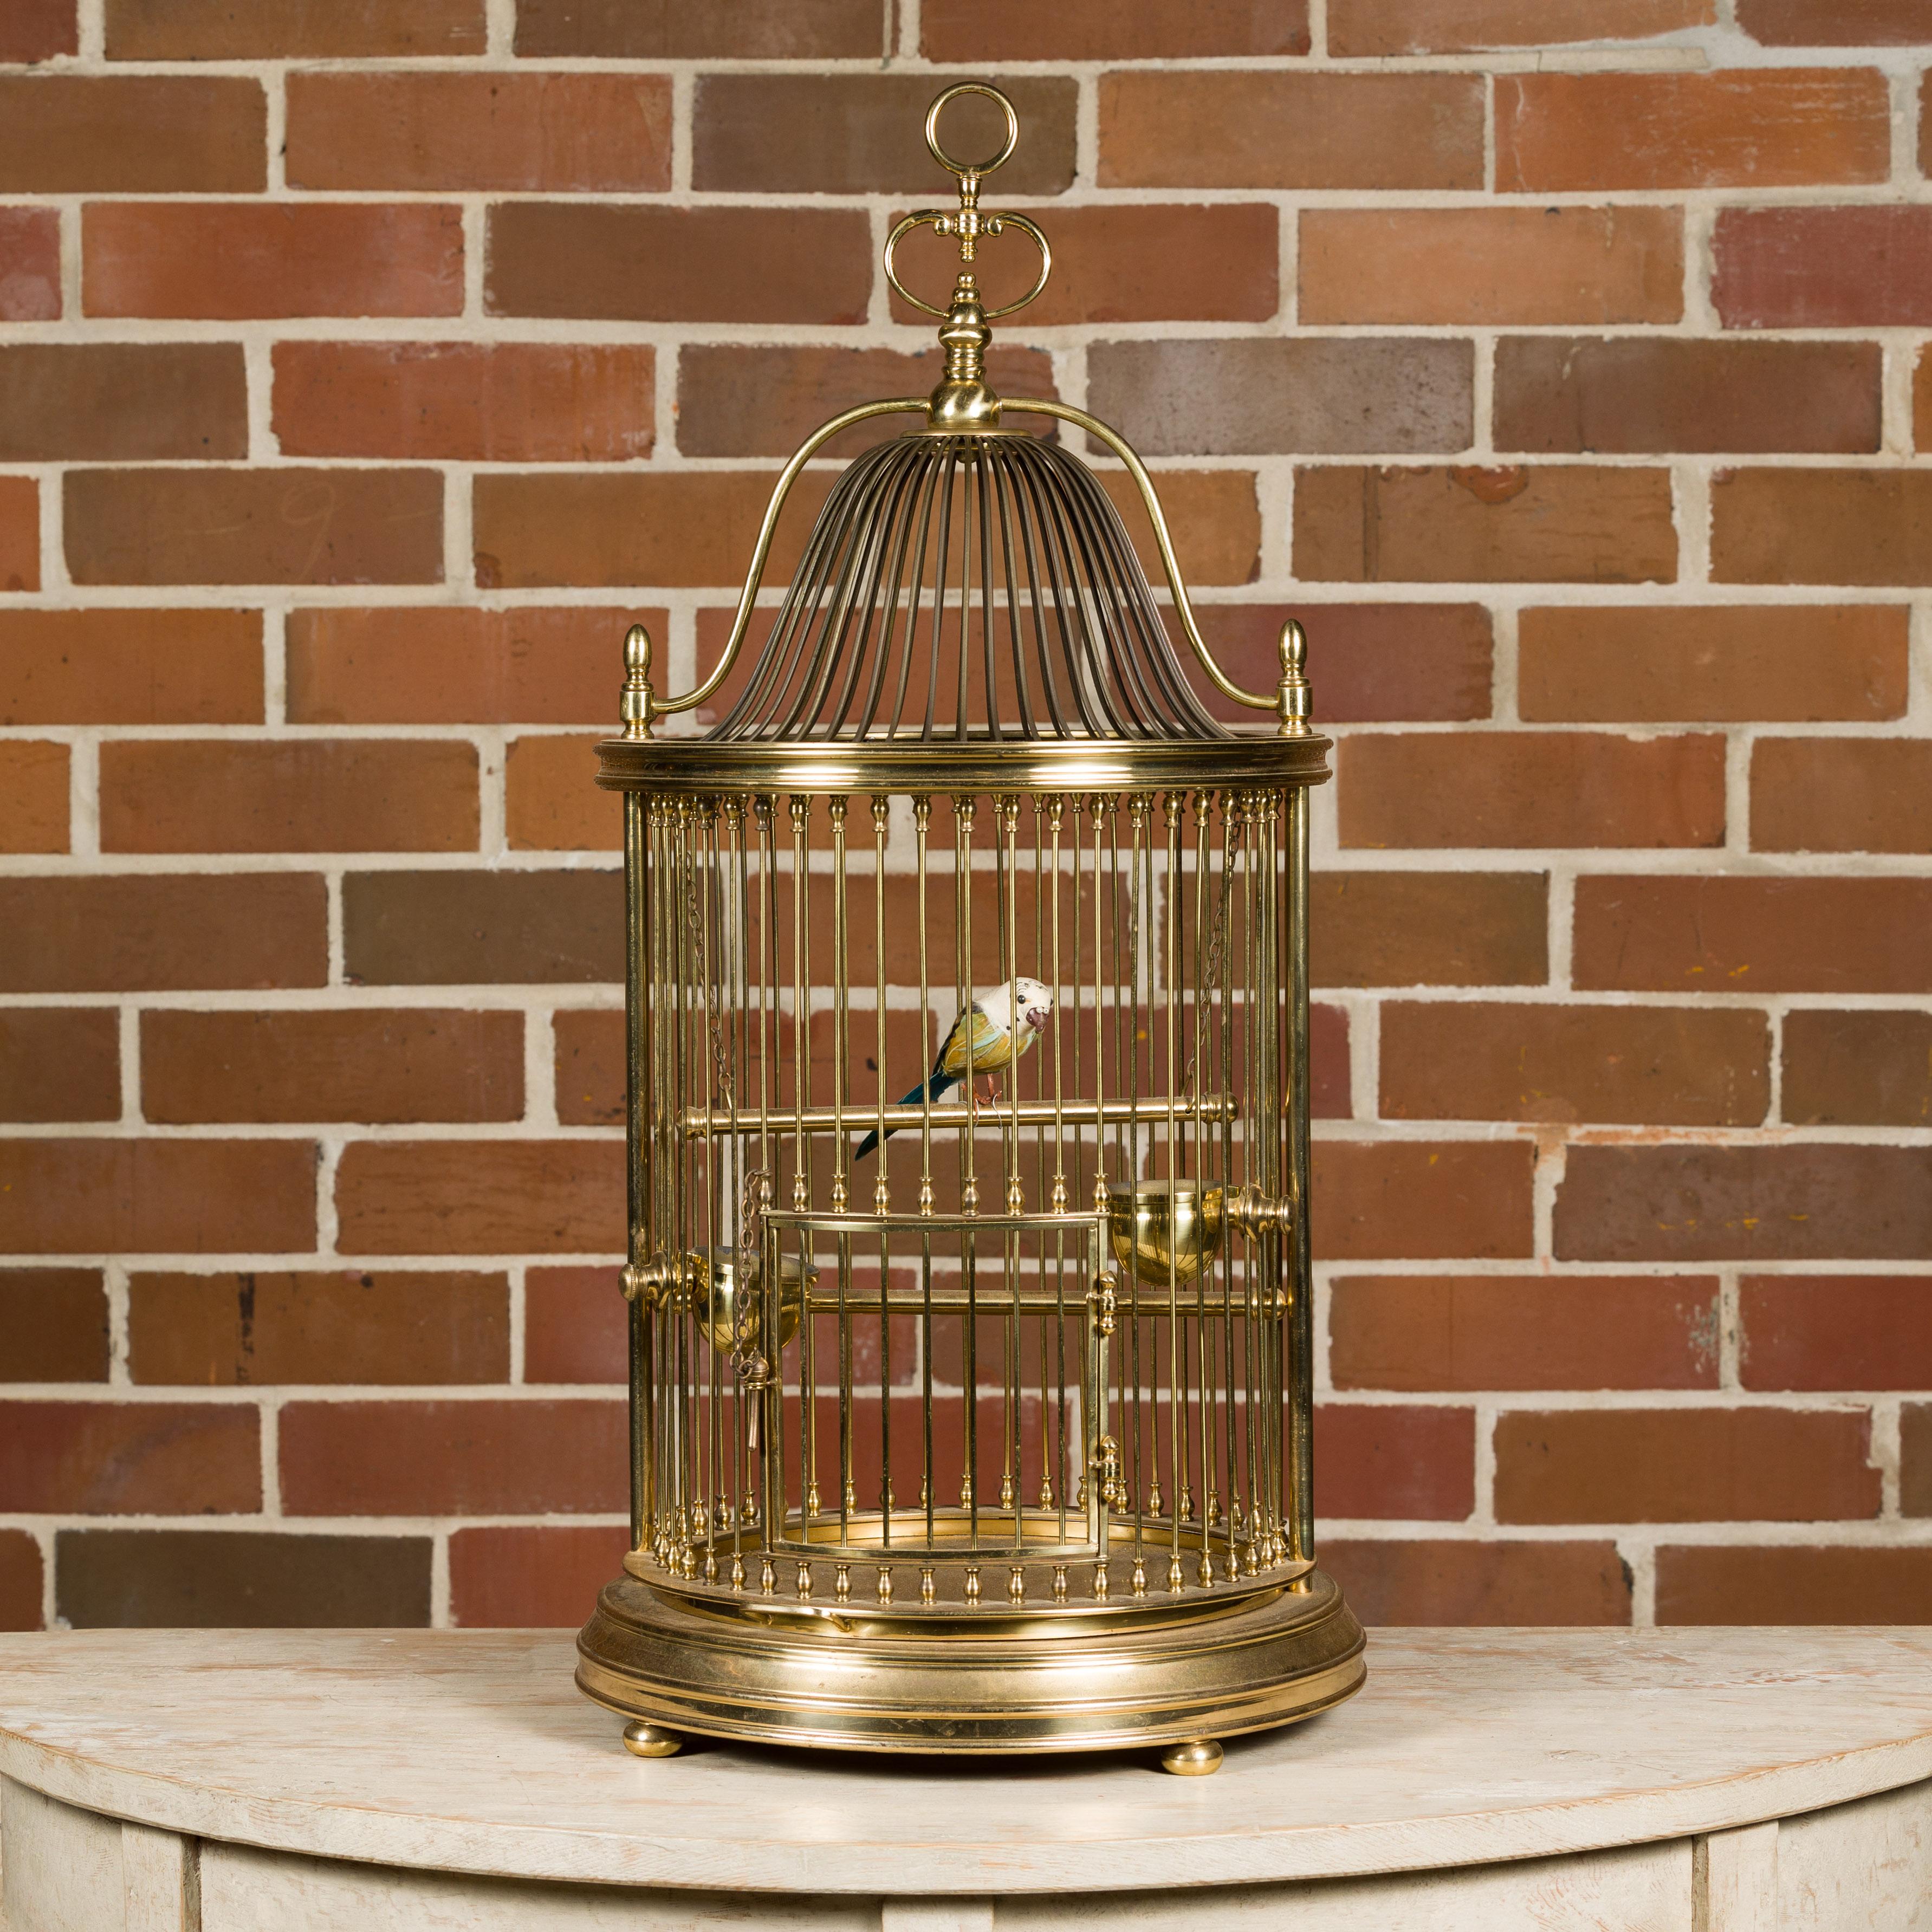 This French brass circular birdcage from the Midcentury period is a delightful combination of form and whimsy, perfect for adding a touch of vintage charm to any interior. Crafted with meticulous attention to detail, this birdcage features a lovely